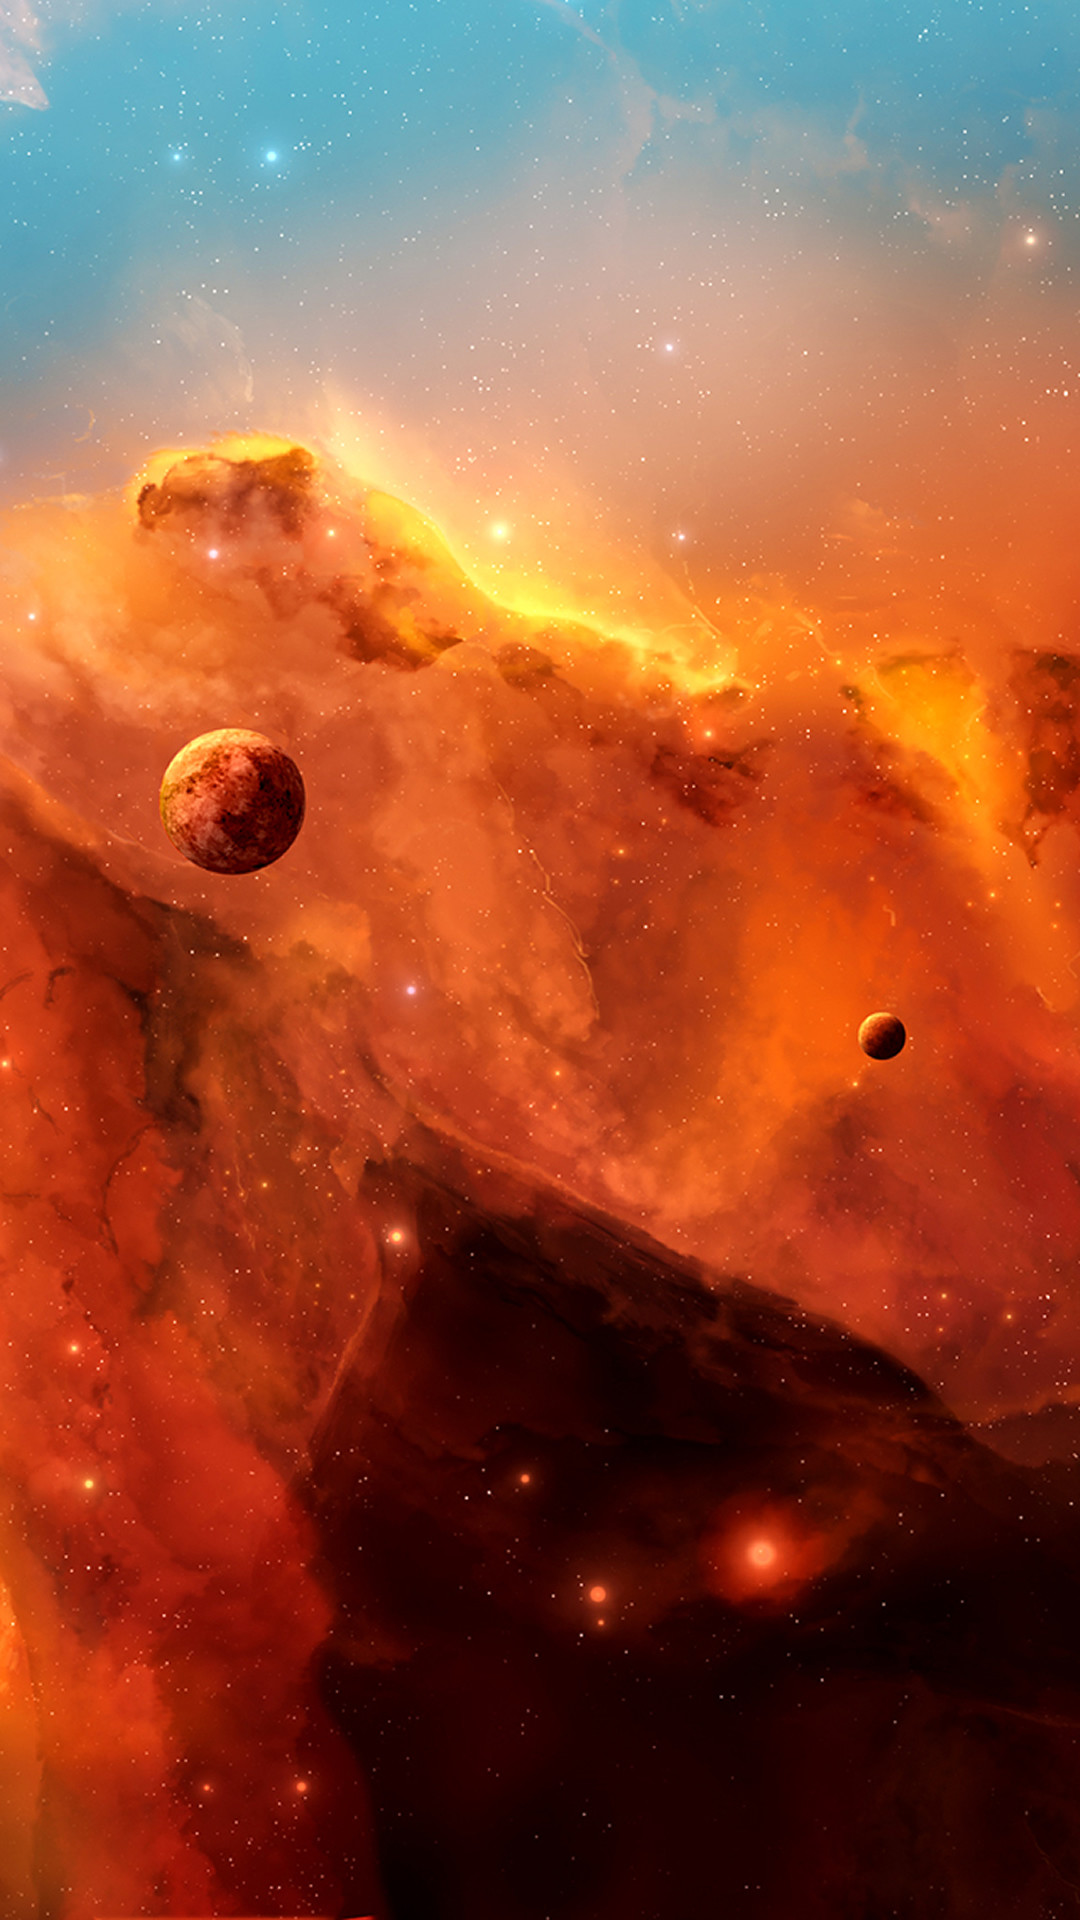 1080x1920 Space Clouds Planets Illustration #iPhone #6 #plus #wallpaper